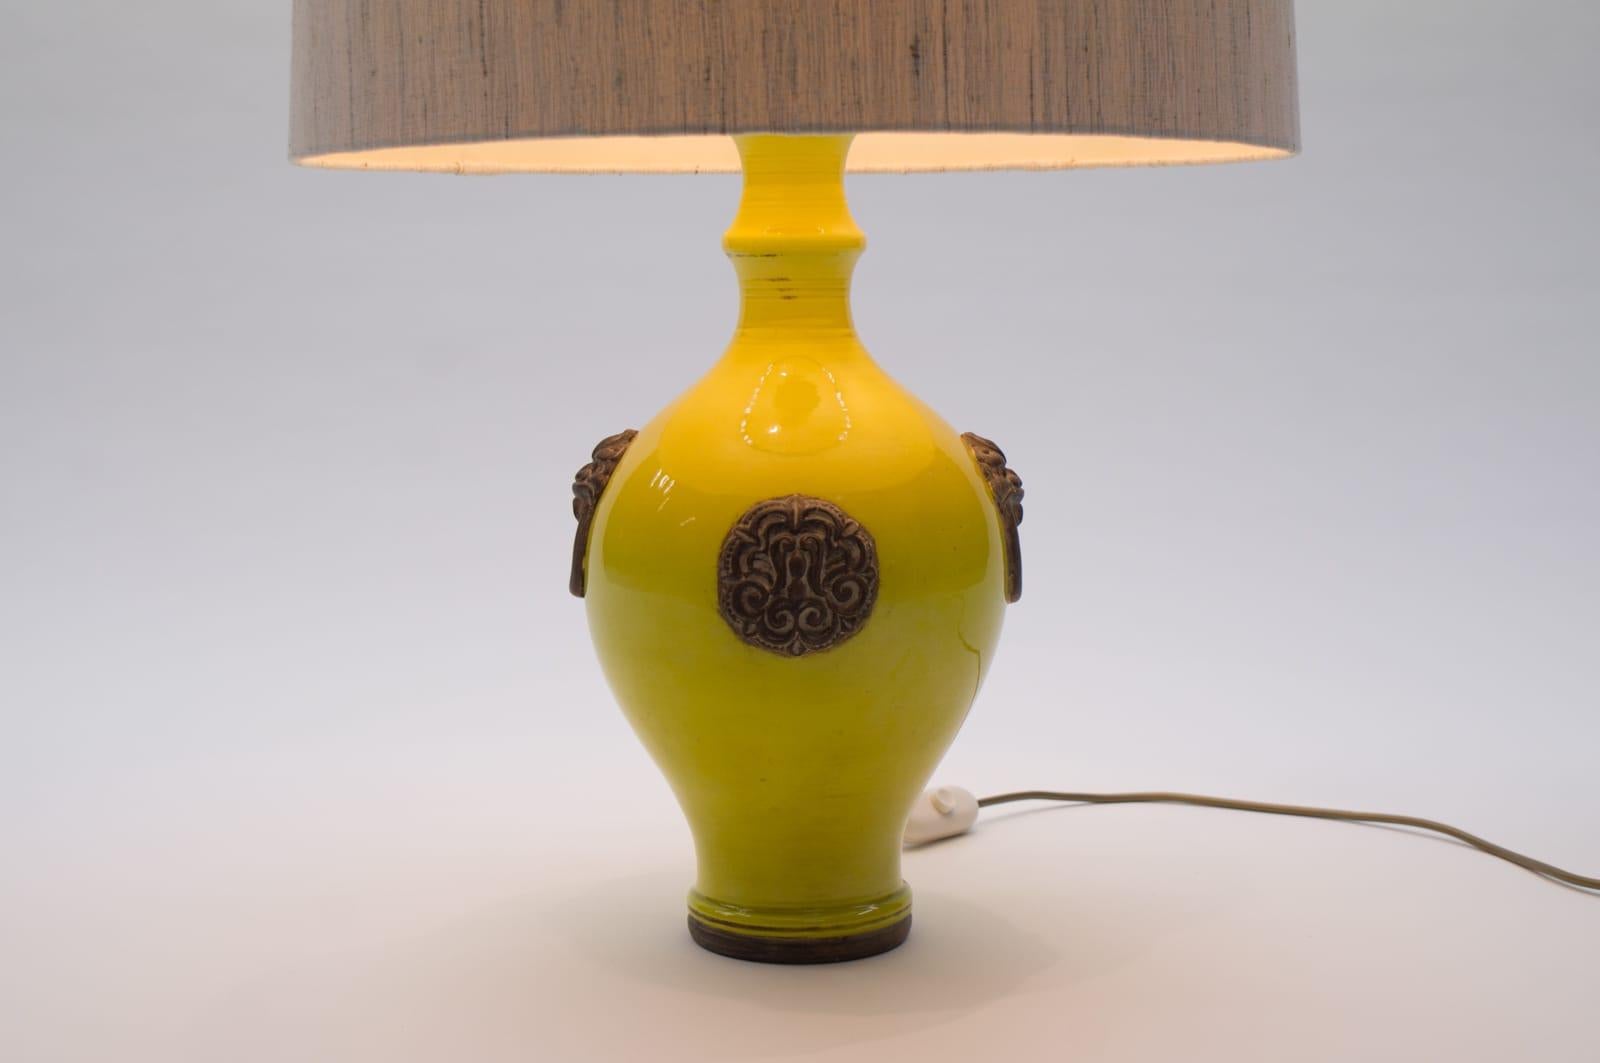 Oatmeal and Yellow Gilt Glazed Ceramic Table Lamp by Ugo Zaccagnini, Italy 1960s im Zustand „Hervorragend“ im Angebot in Nürnberg, Bayern